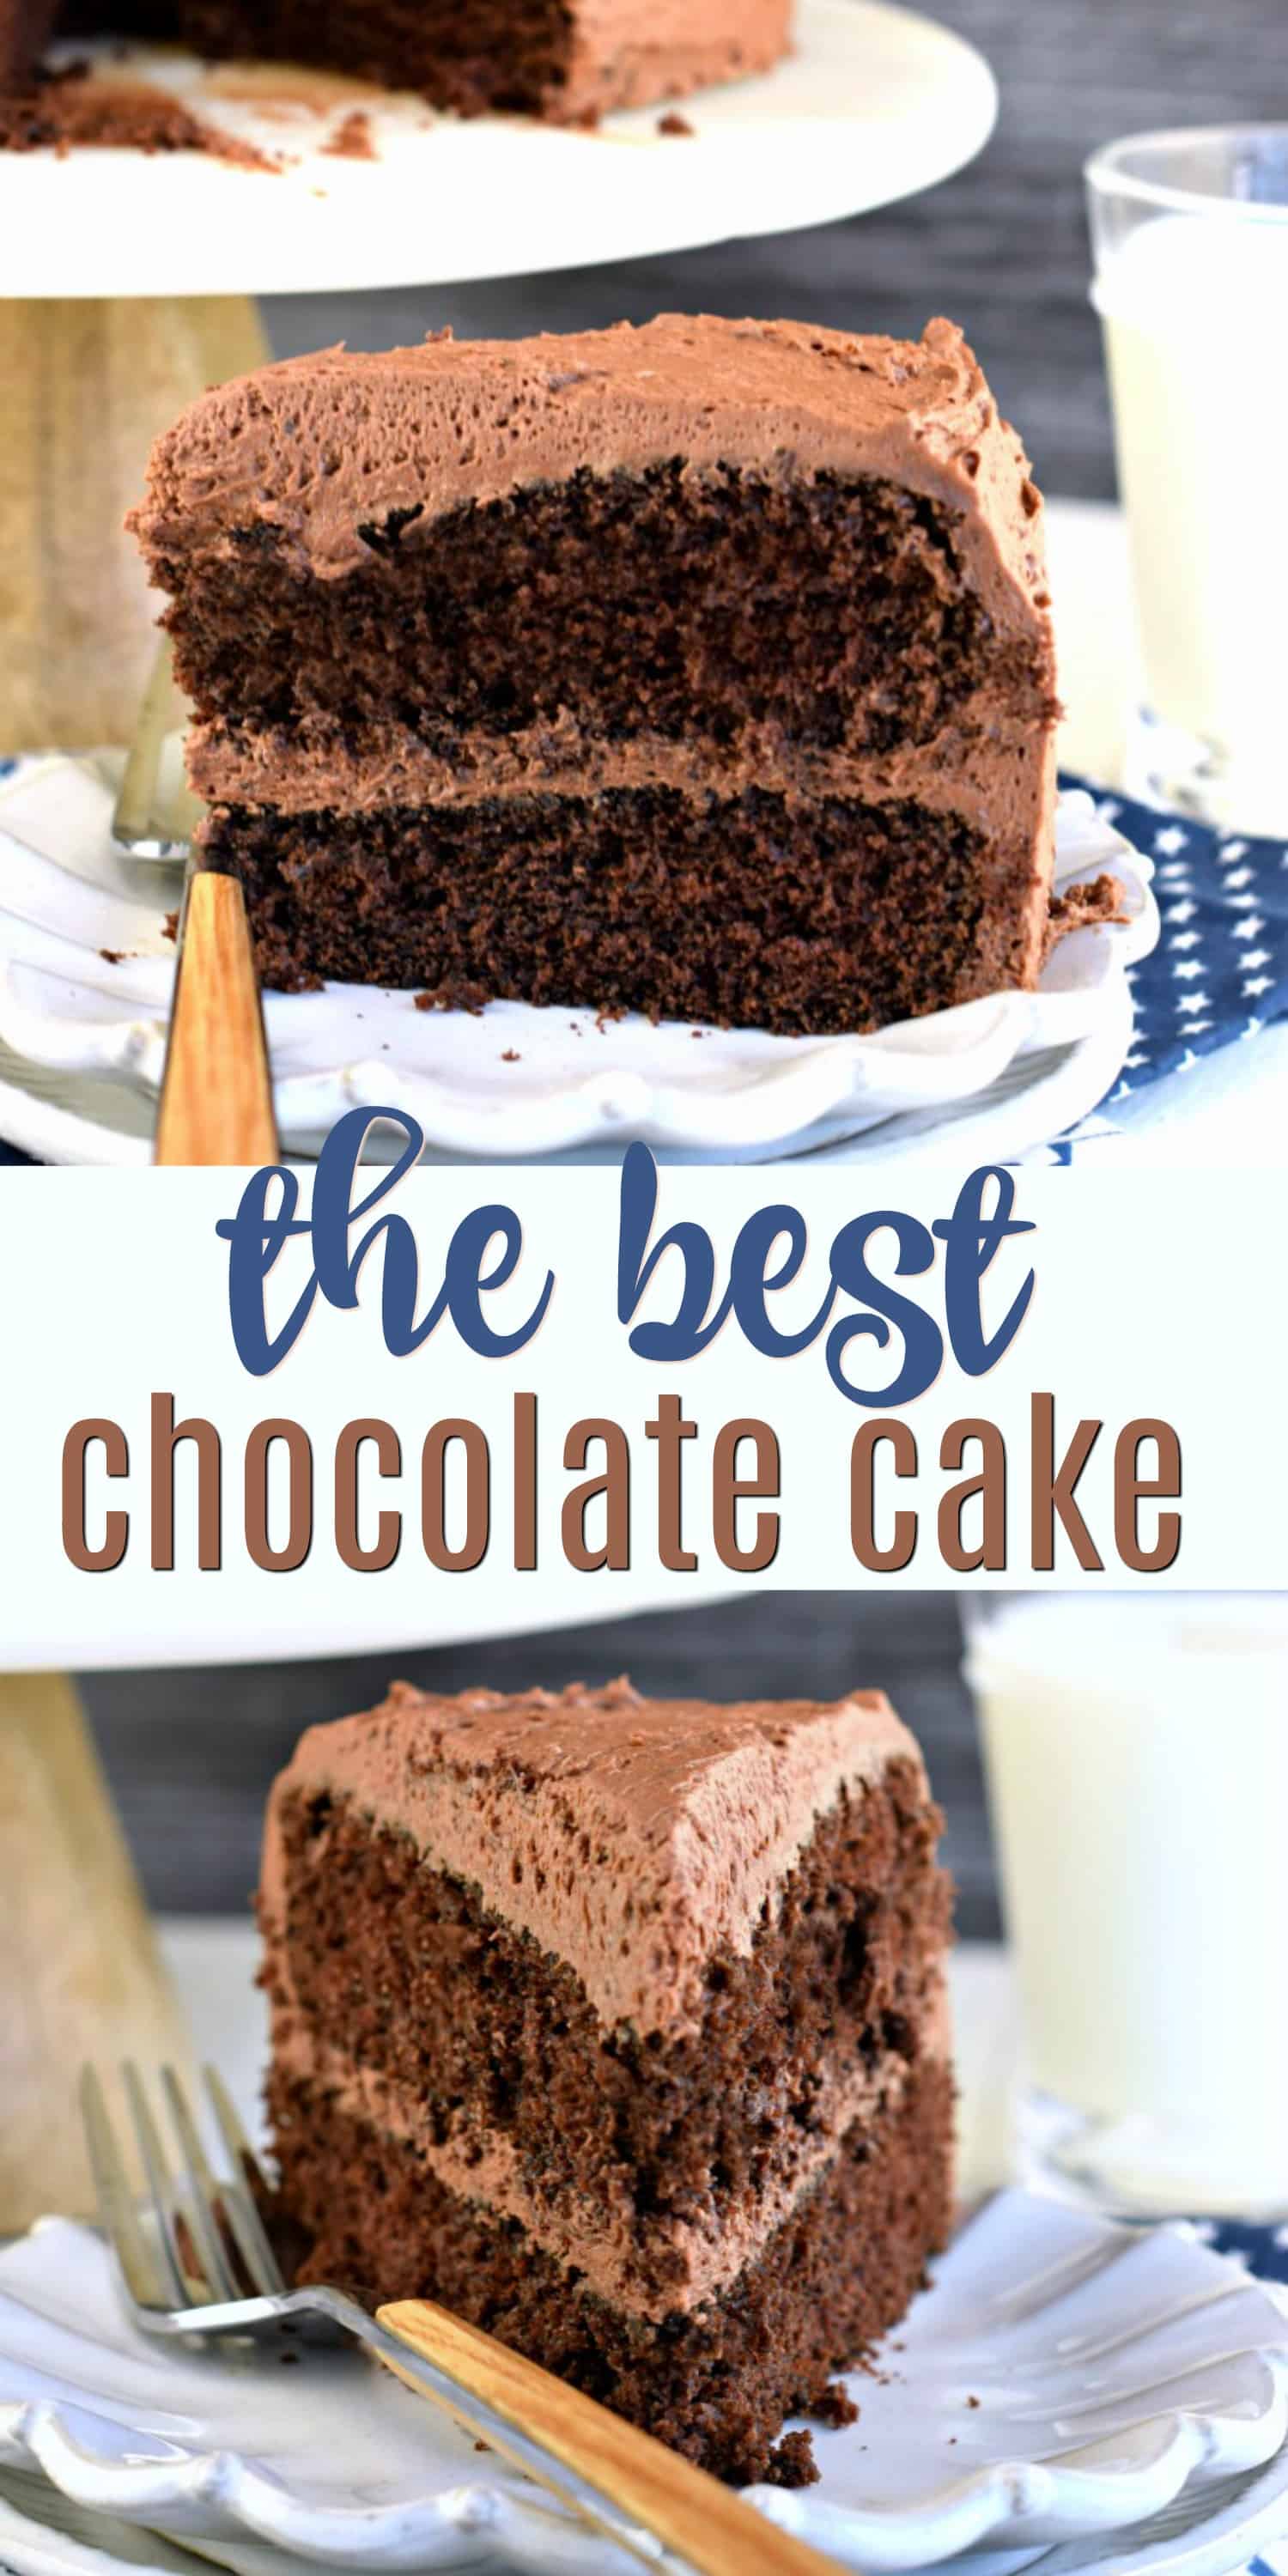 Perfect Chocolate Cake with Chocolate Buttercream Frosting Recipe